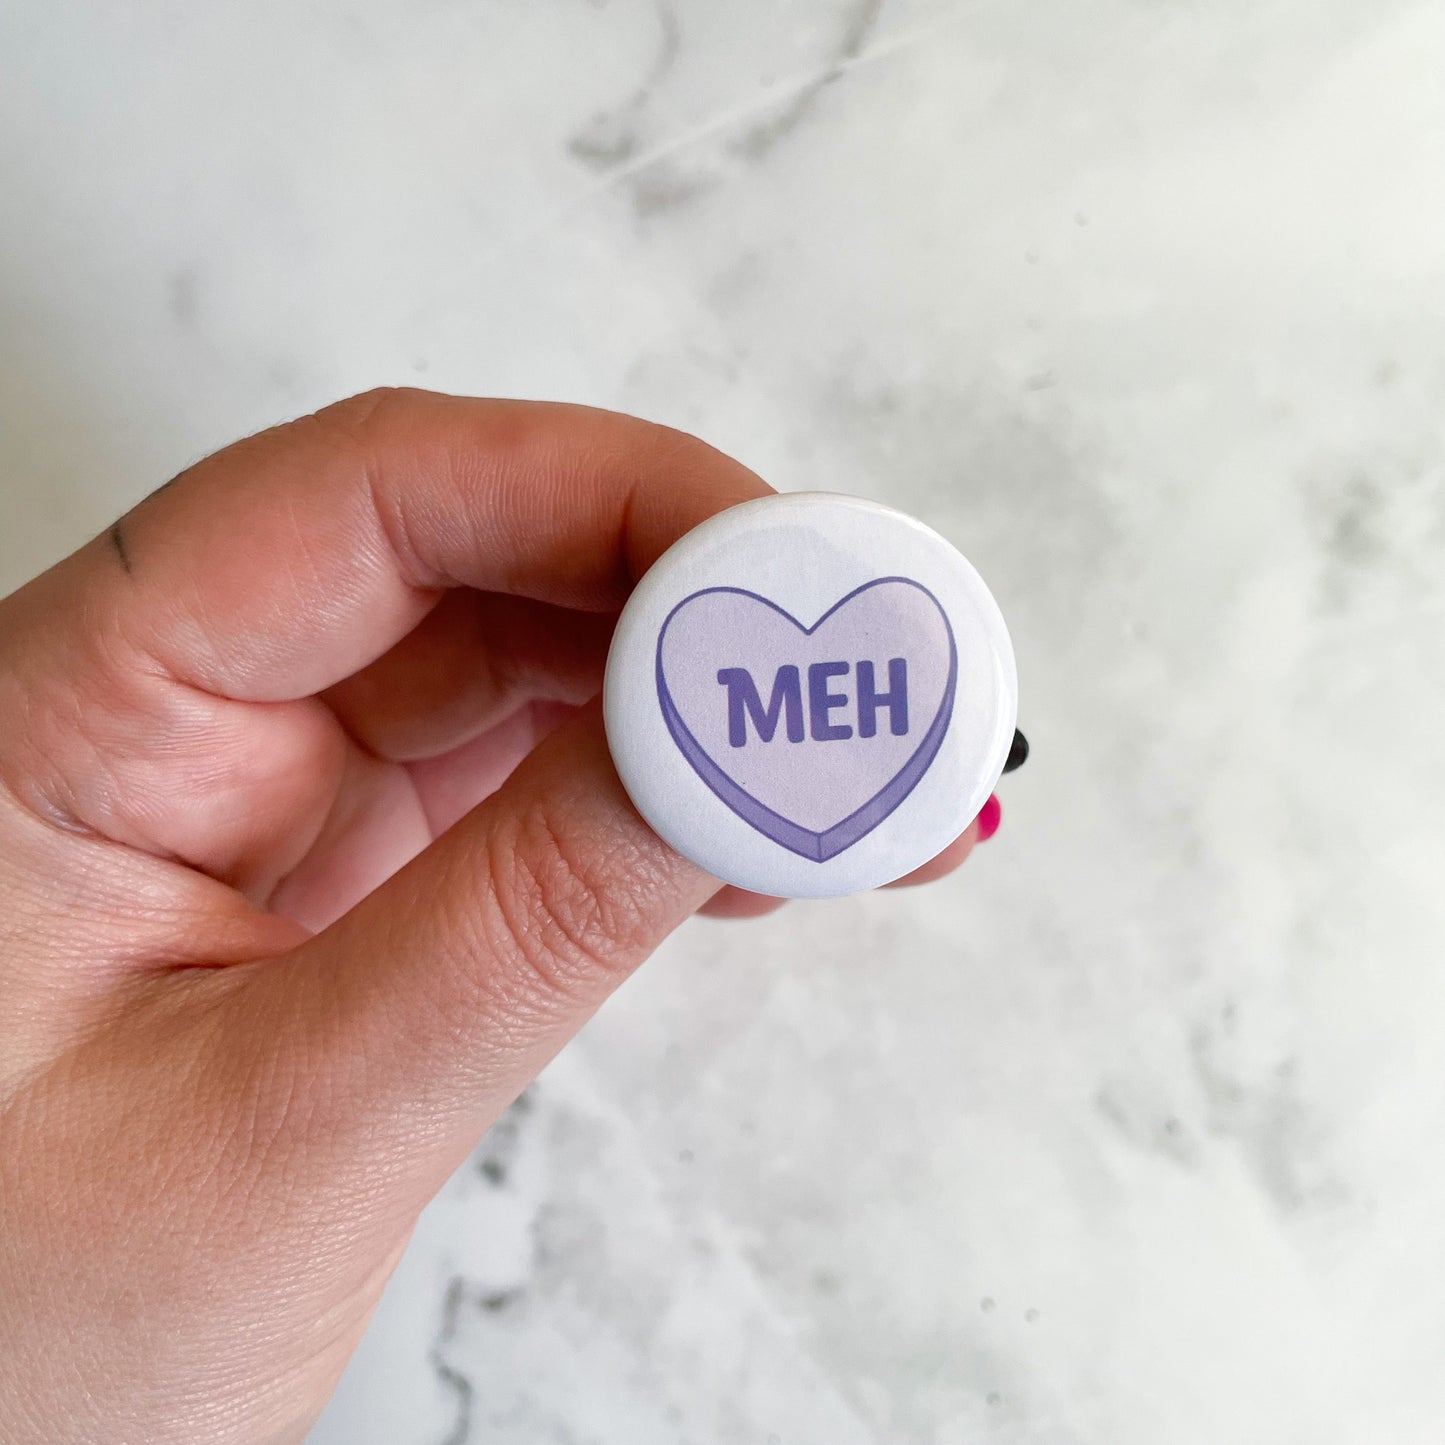 Meh Candy Heart Button / Badge (Buy 4 Get 1 FREE)